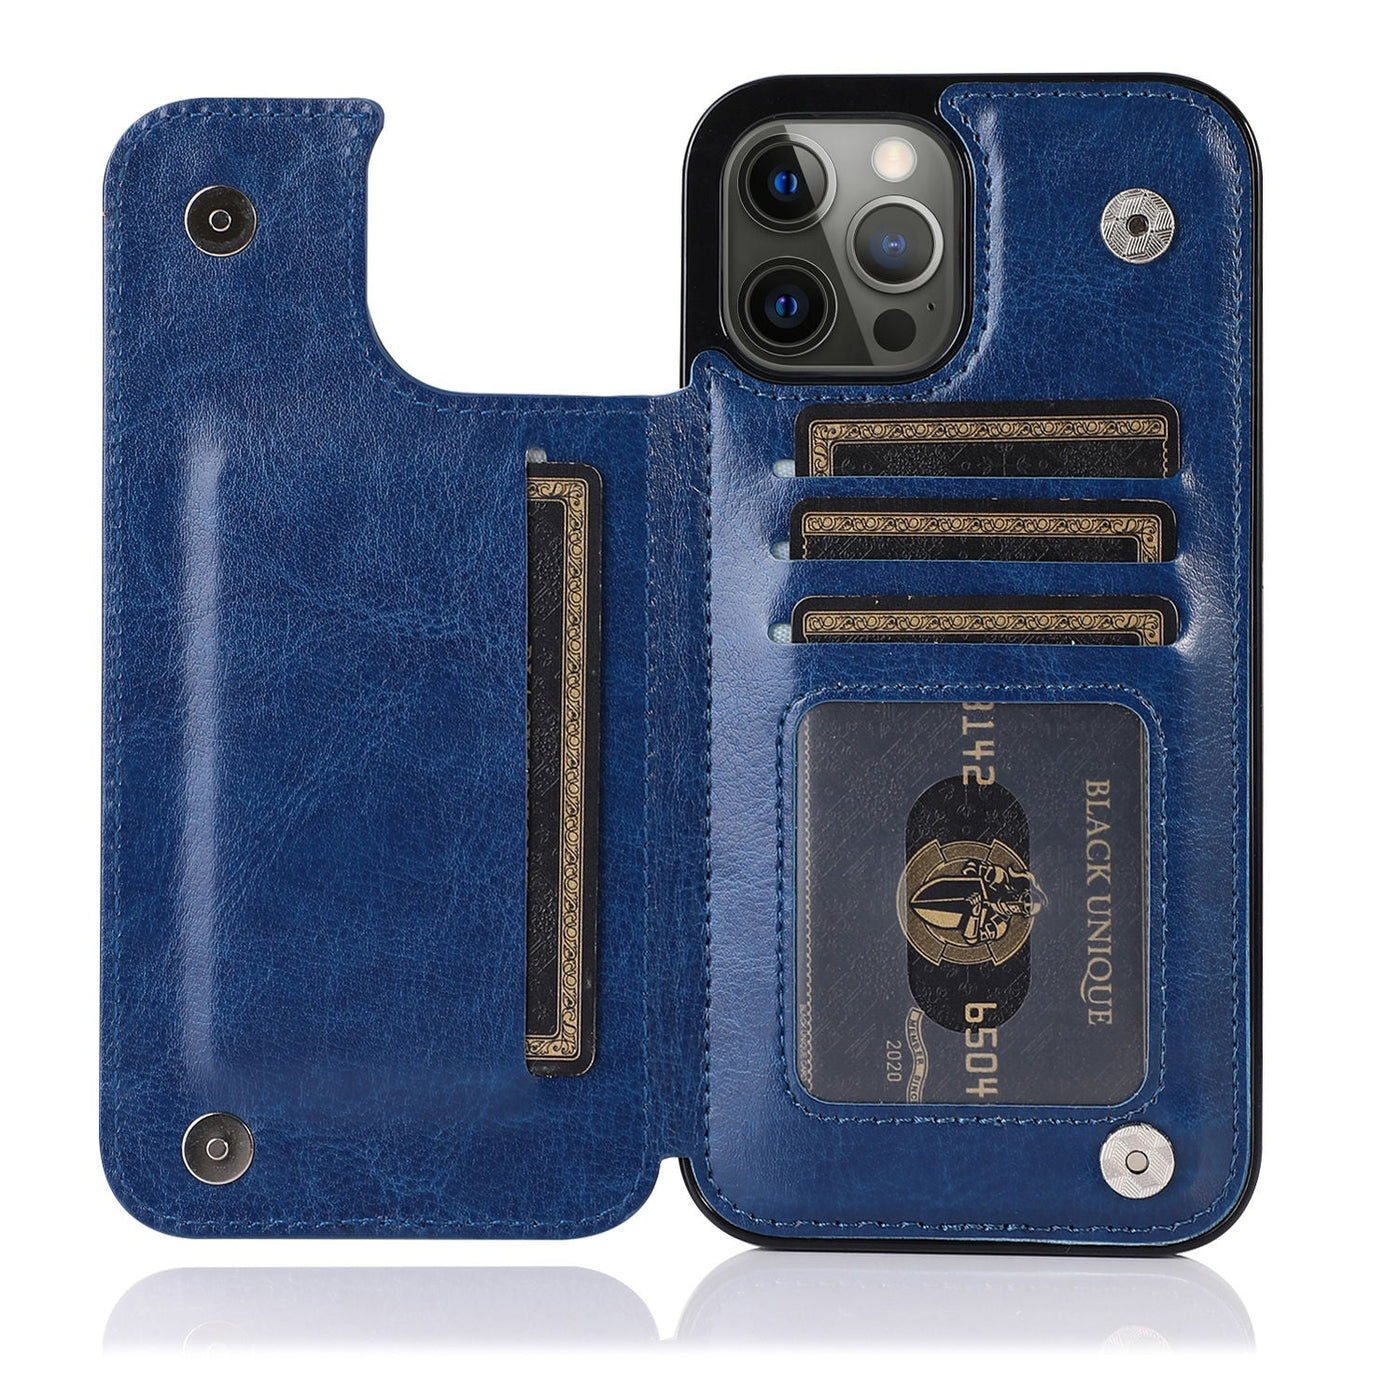 Double Buckle Leather Case with Card Slots for iPhone 14 series - theroxymob